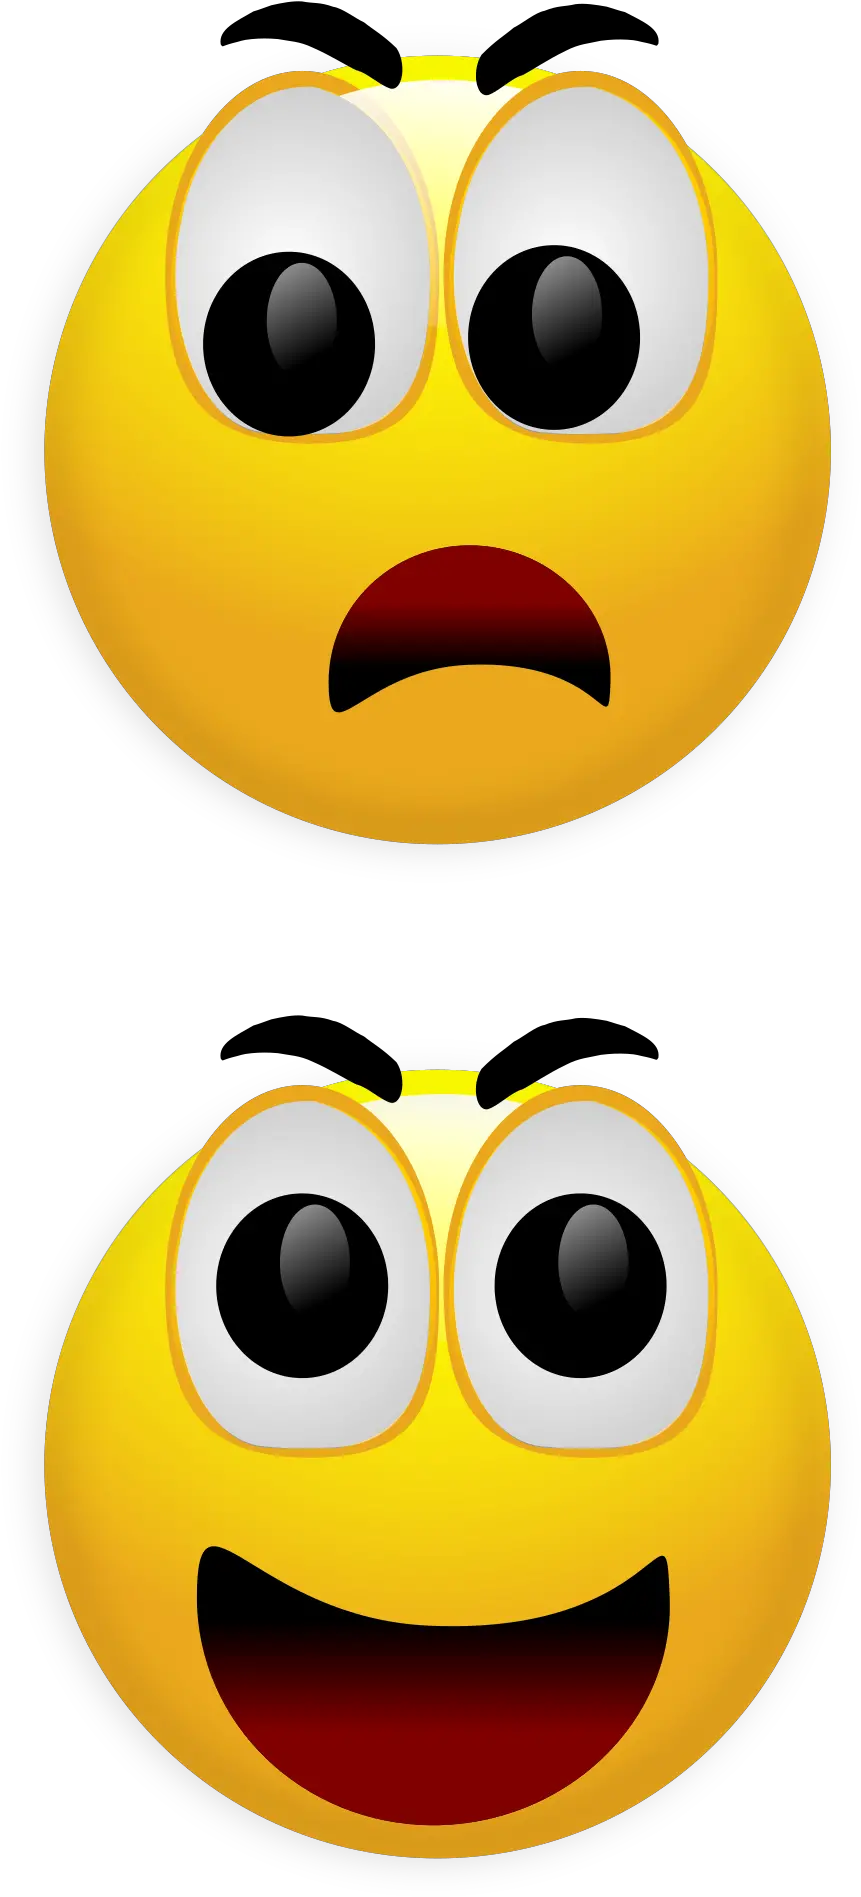 Smiley Fear Anger Free Vector Graphic On Pixabay Clitart Amaze Png Anger Icon